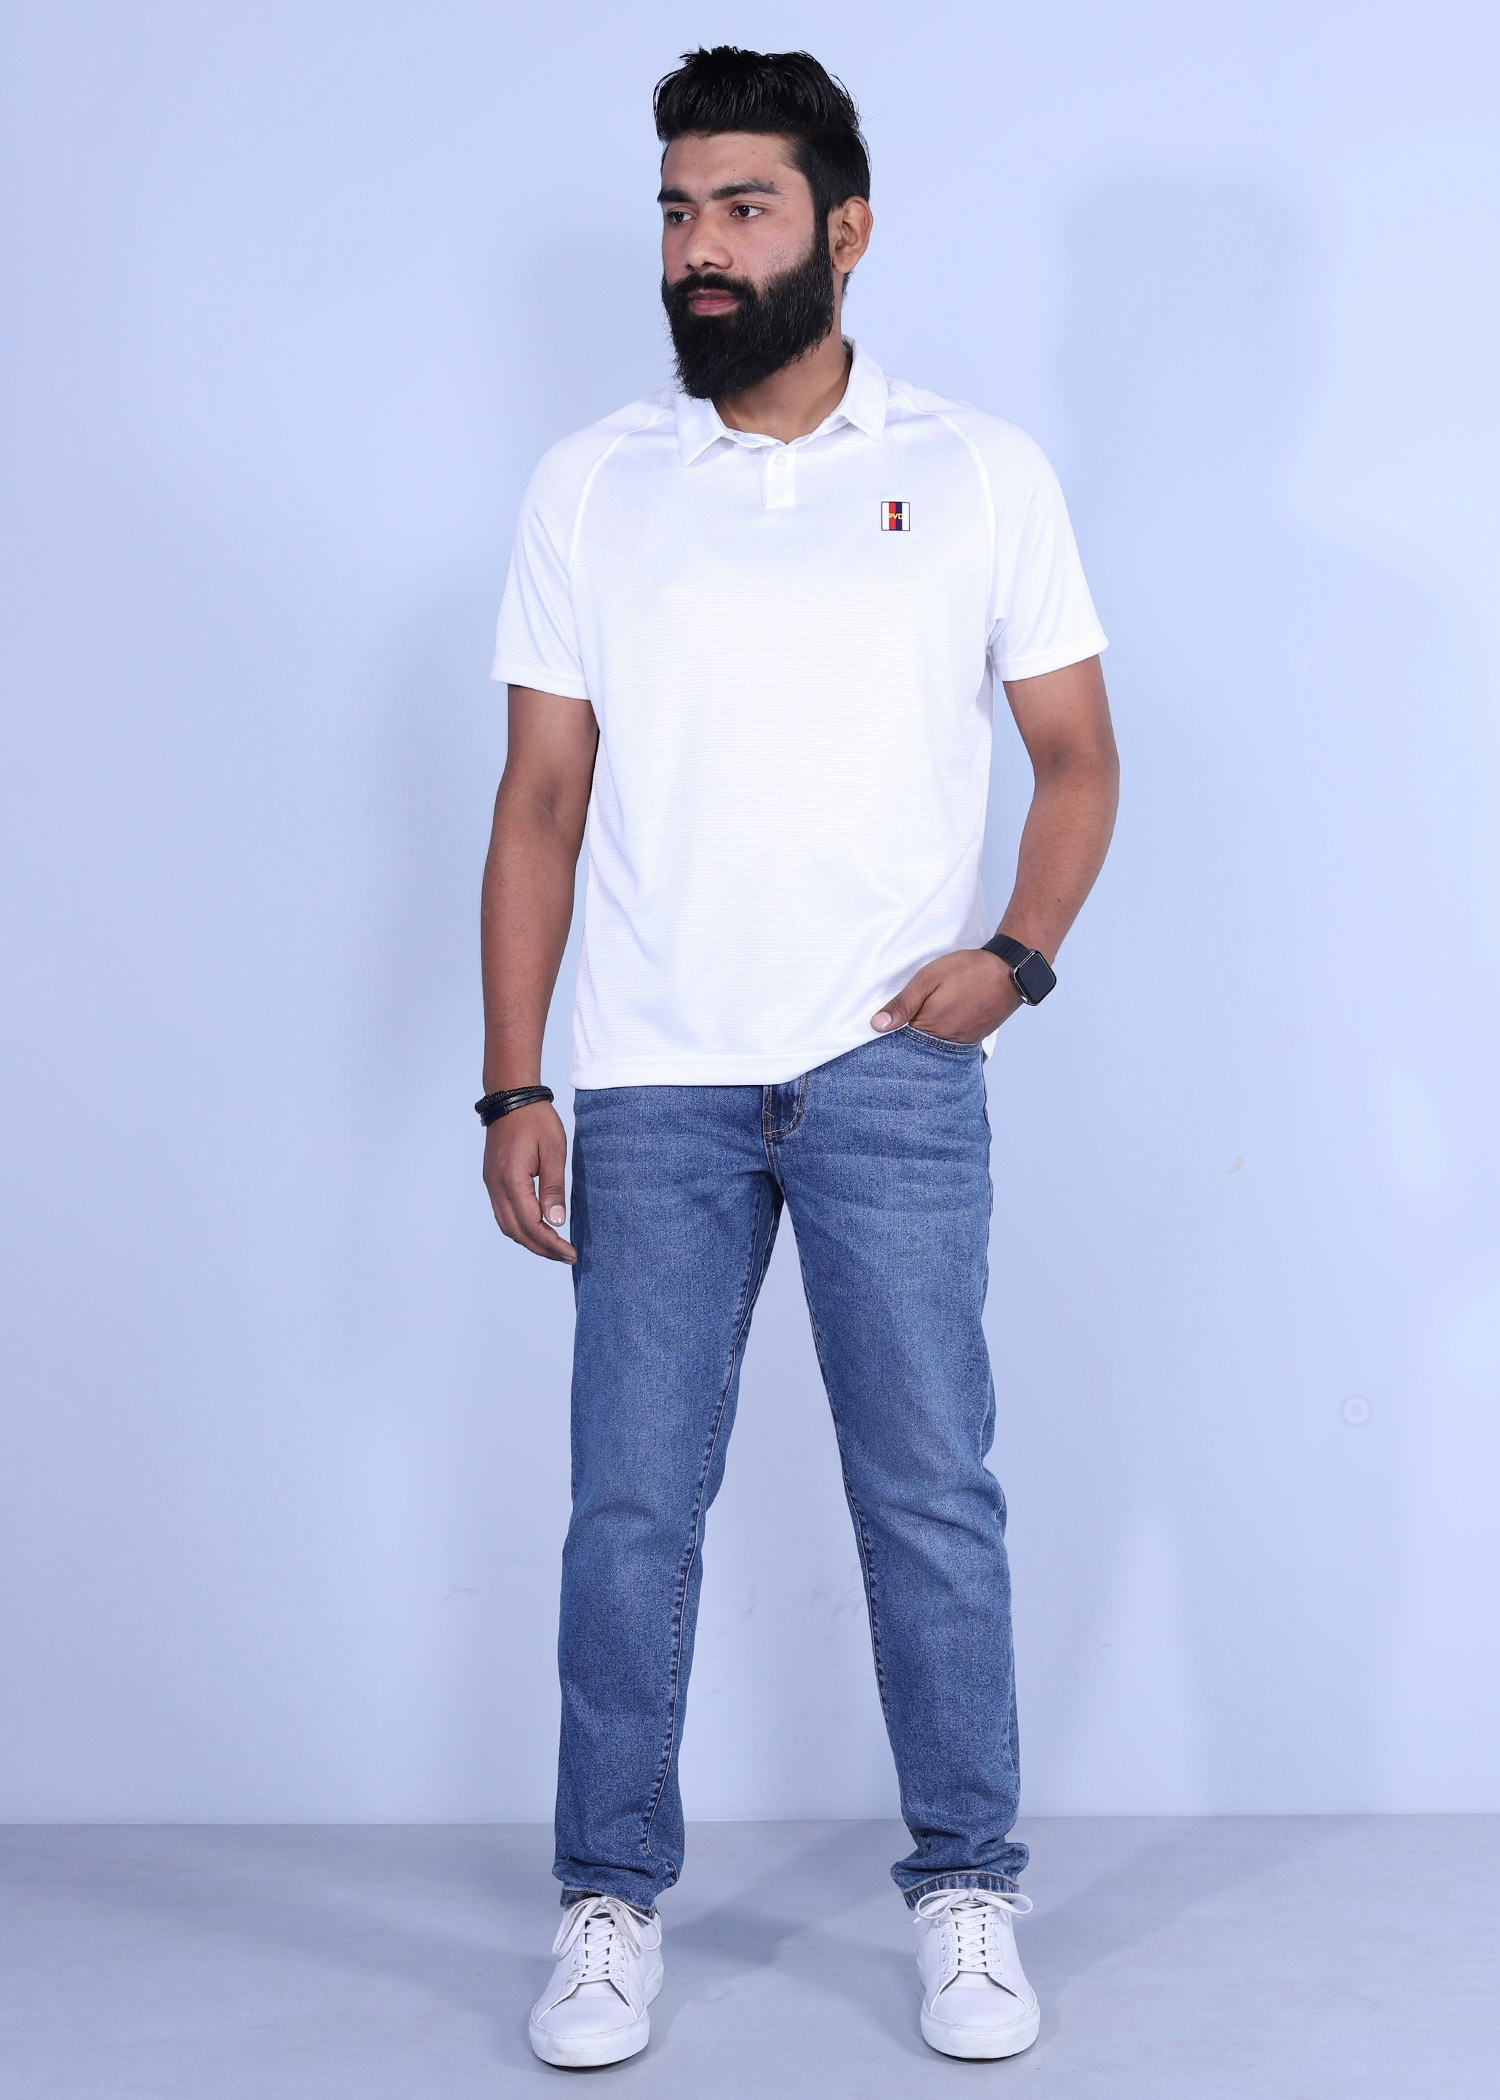 holfman polo white color full front view